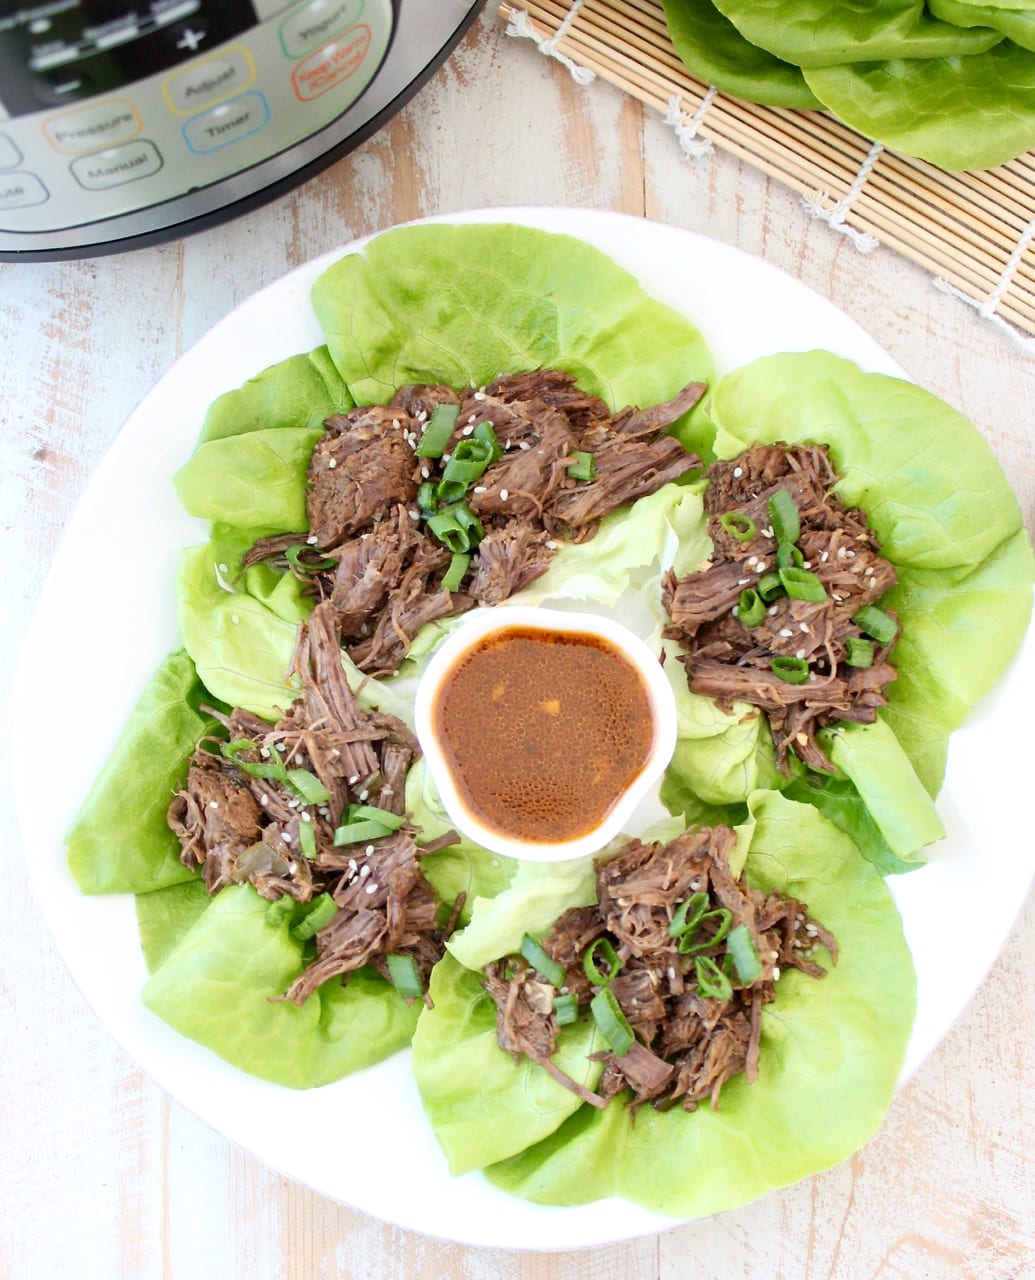 Whole30 Thai Beef is easy to make in the Instant Pot in under an hour. Shred the beef and serve it in lettuce wraps for a Whole30 meal or serve it in corn tortillas for a gluten free Thai twist on Taco Tuesday!